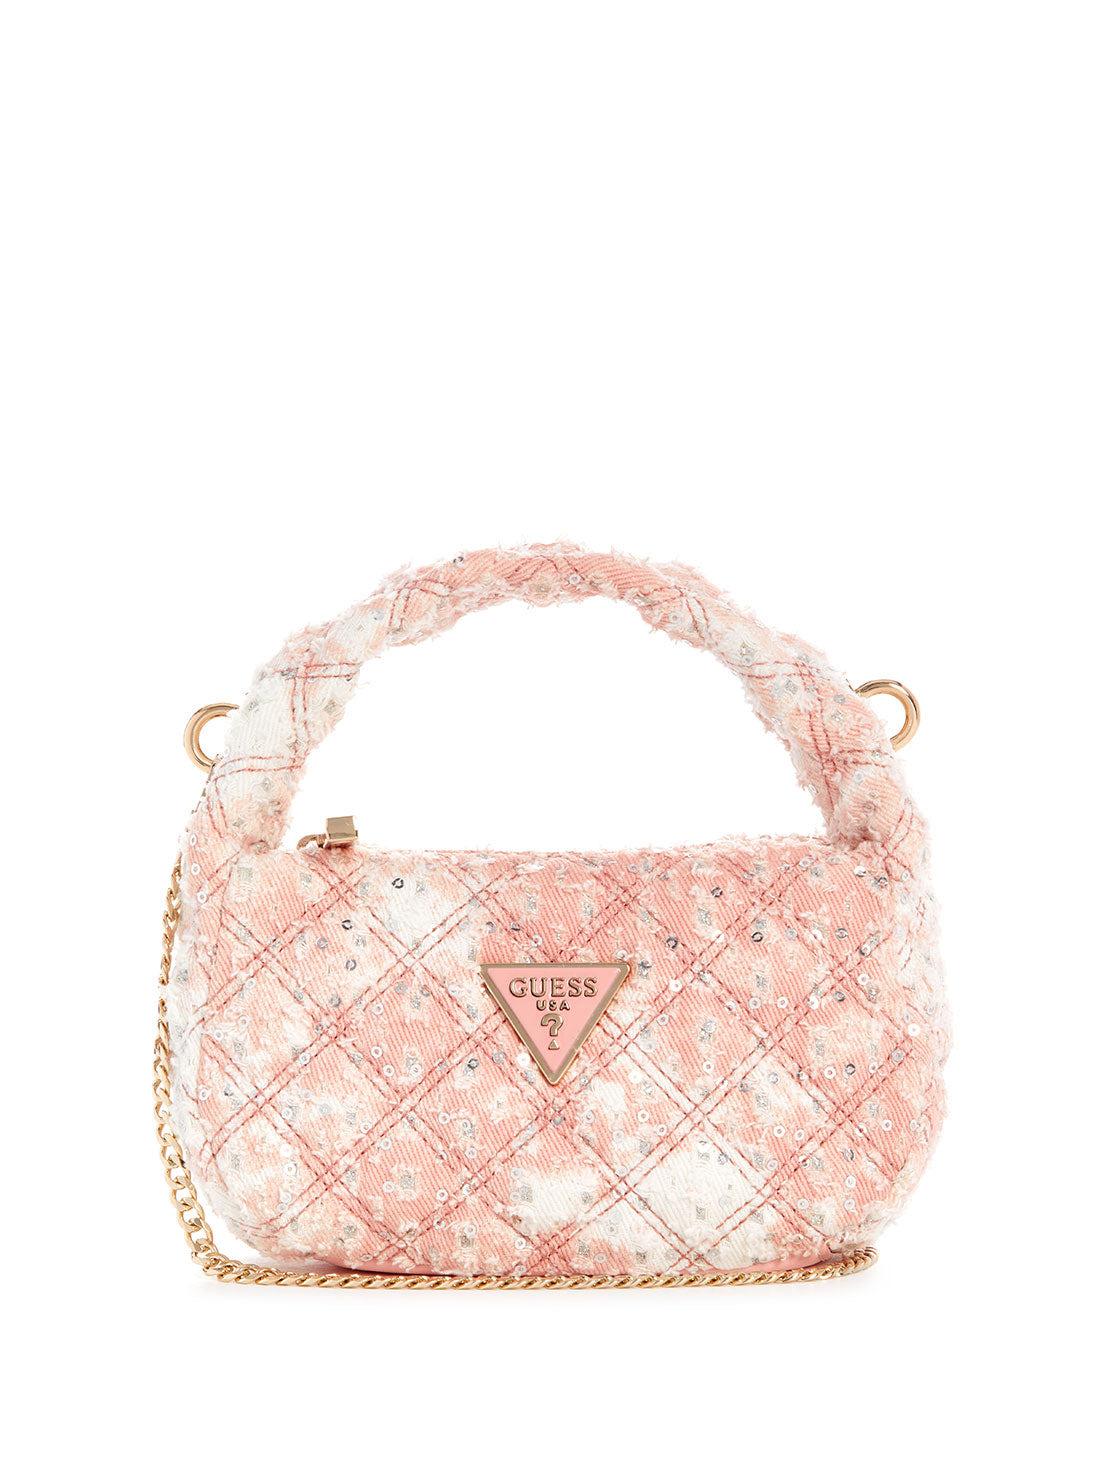 GUESS Pink Rianee Mini Hobo Bag front view